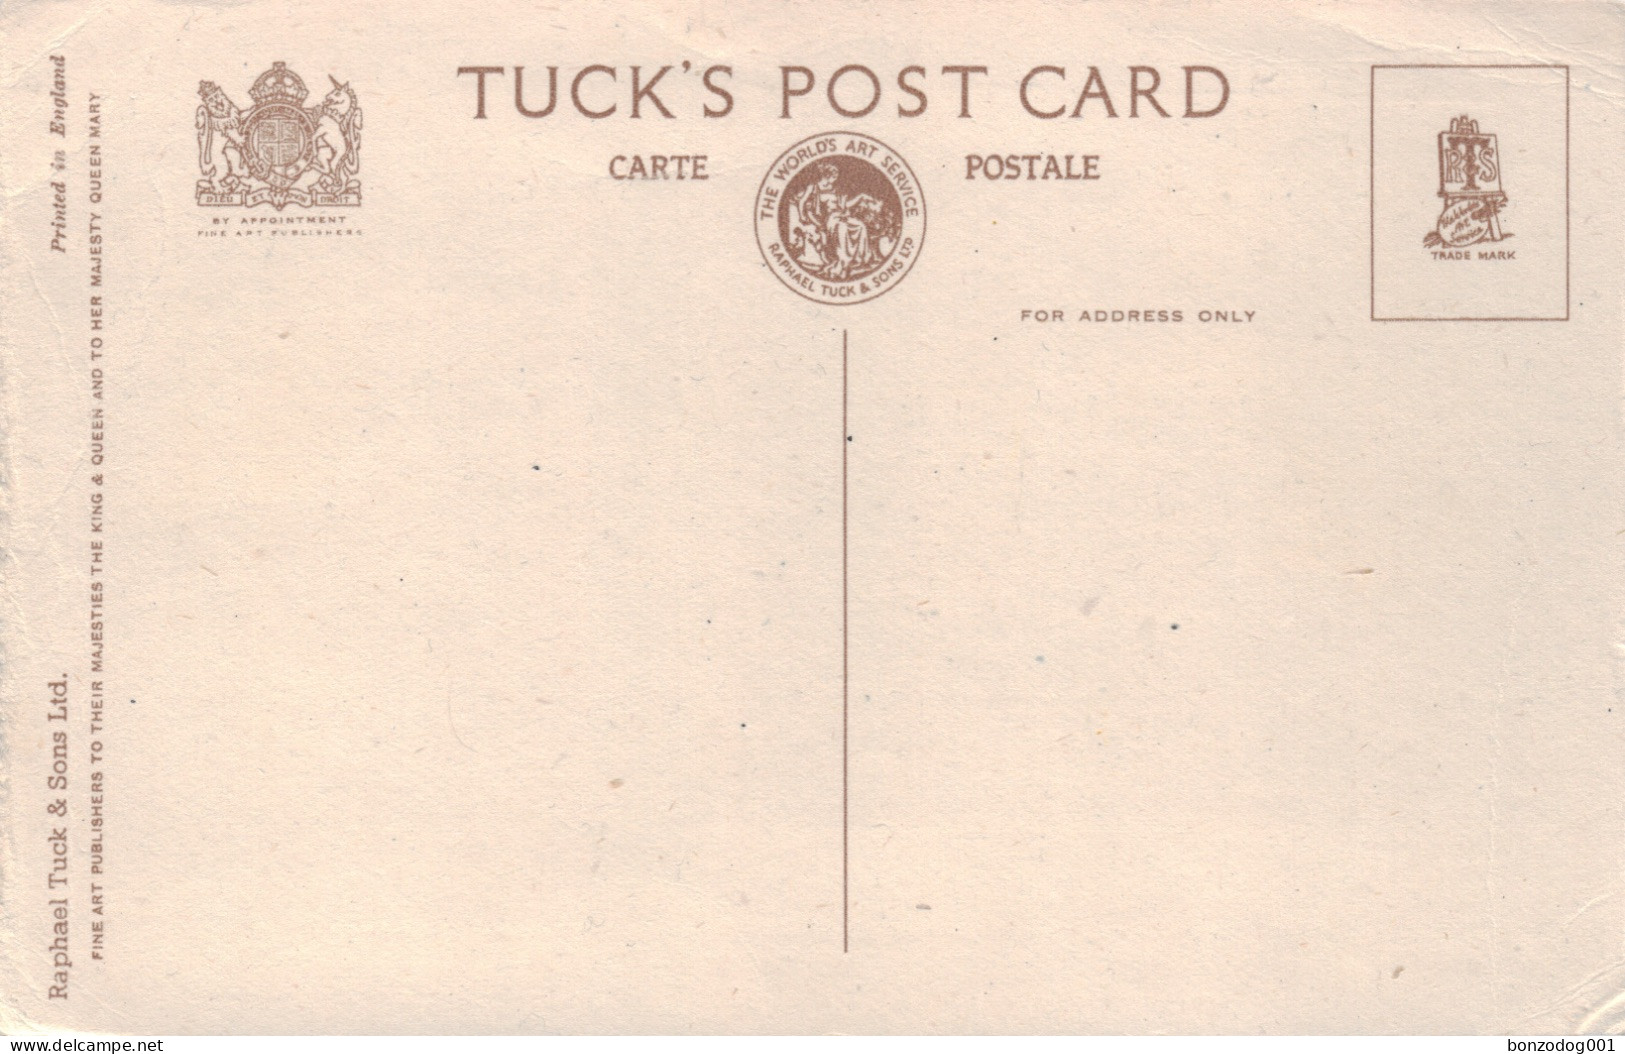 Tuck Postcard View From Flower Gardens, Westcliff-on-Sea, Essex. Unposted - Southend, Westcliff & Leigh